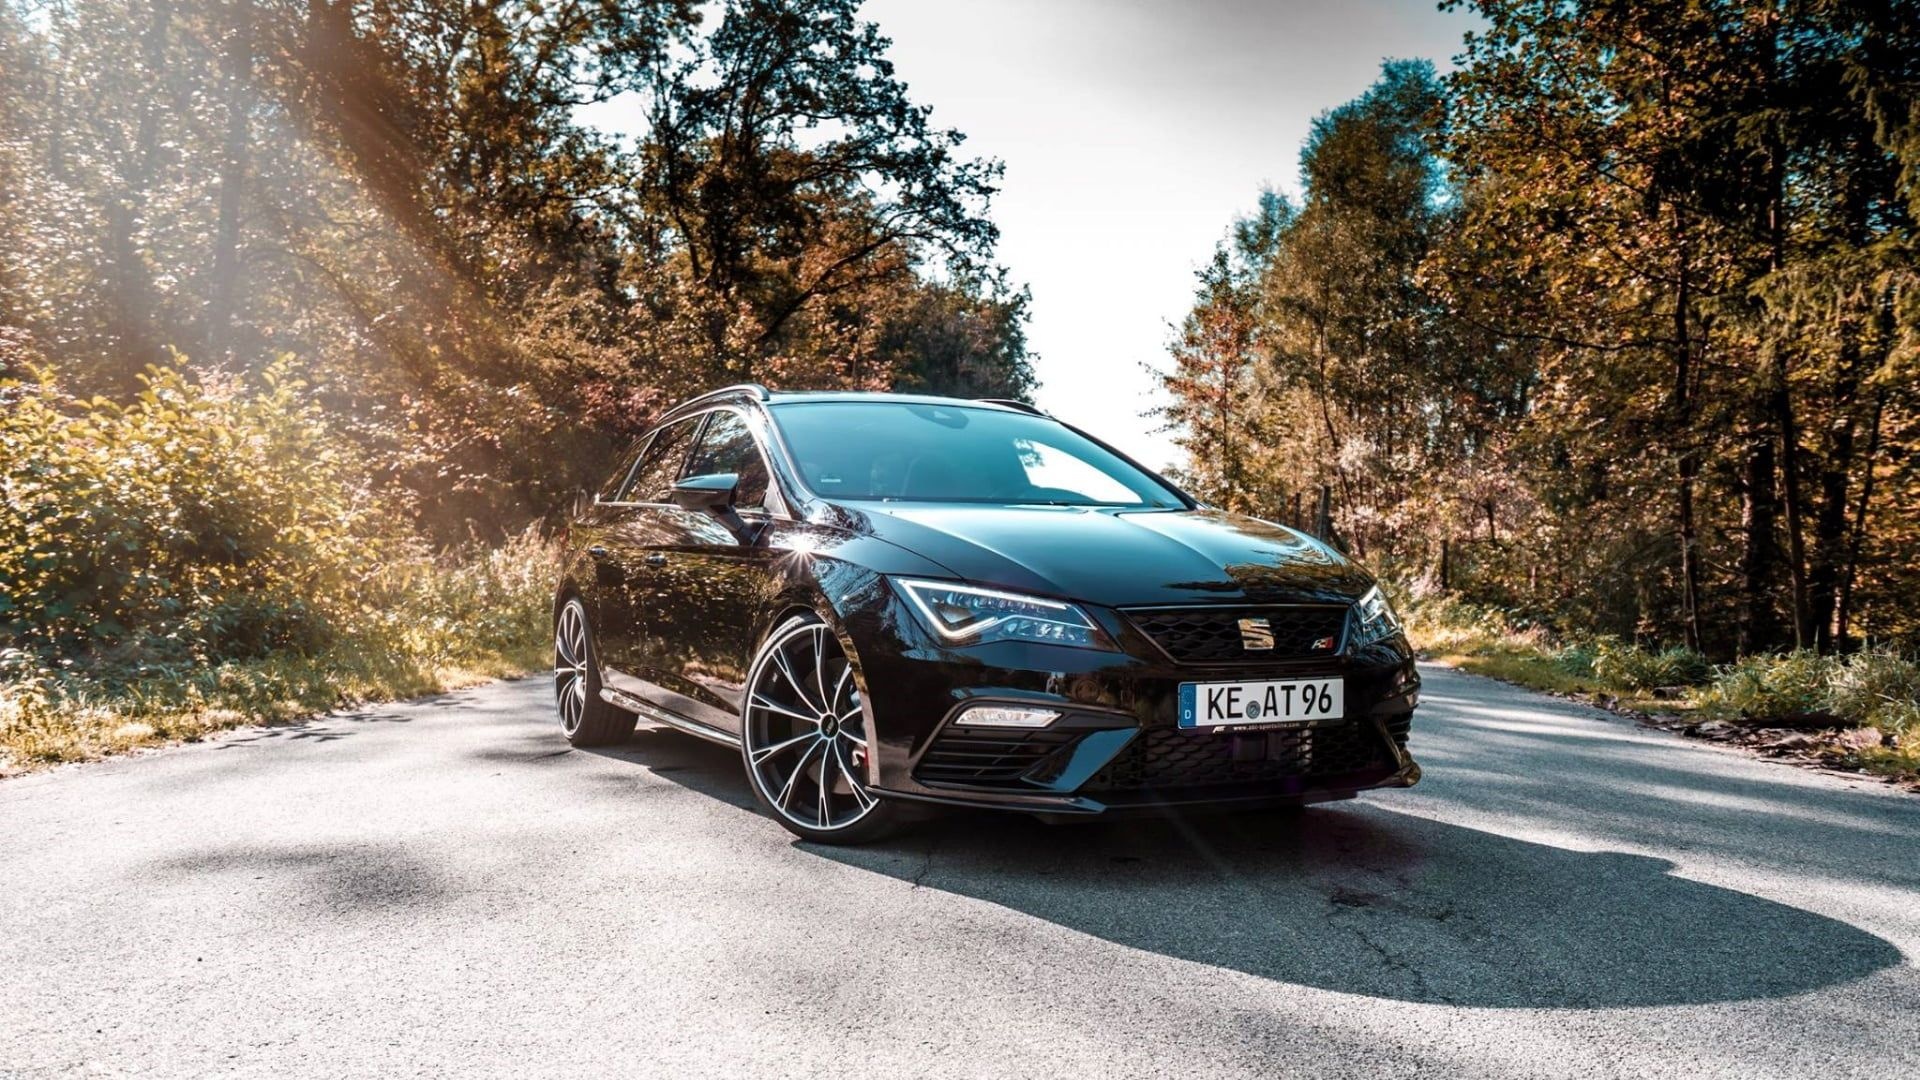 Seat Leon, Captivating visuals, Top-tier performance, High-definition imagery, 1920x1080 Full HD Desktop